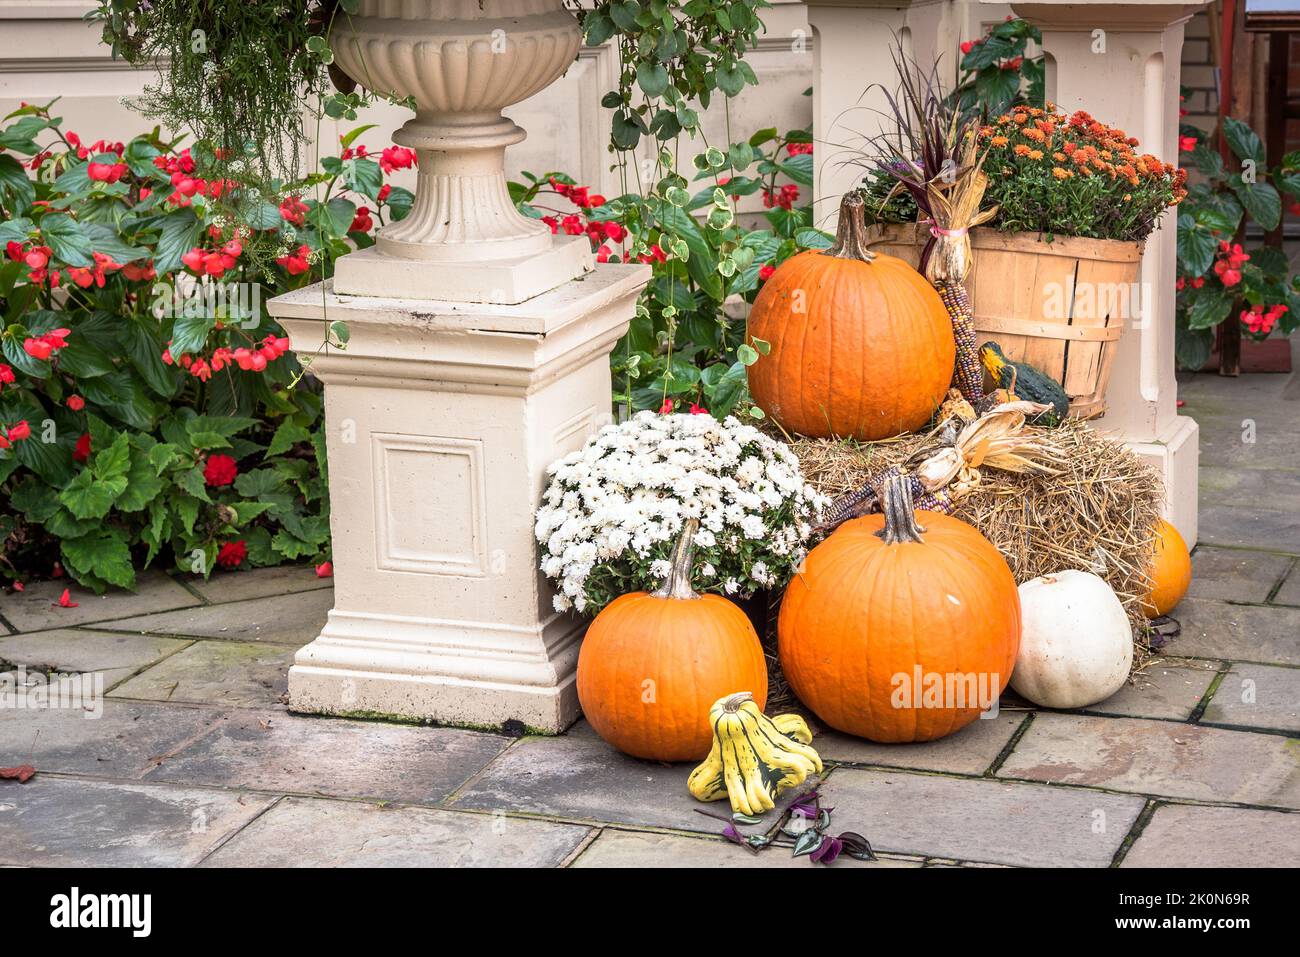 Halloween decorations with pumpkins, hay and flowers outside a house Stock Photo